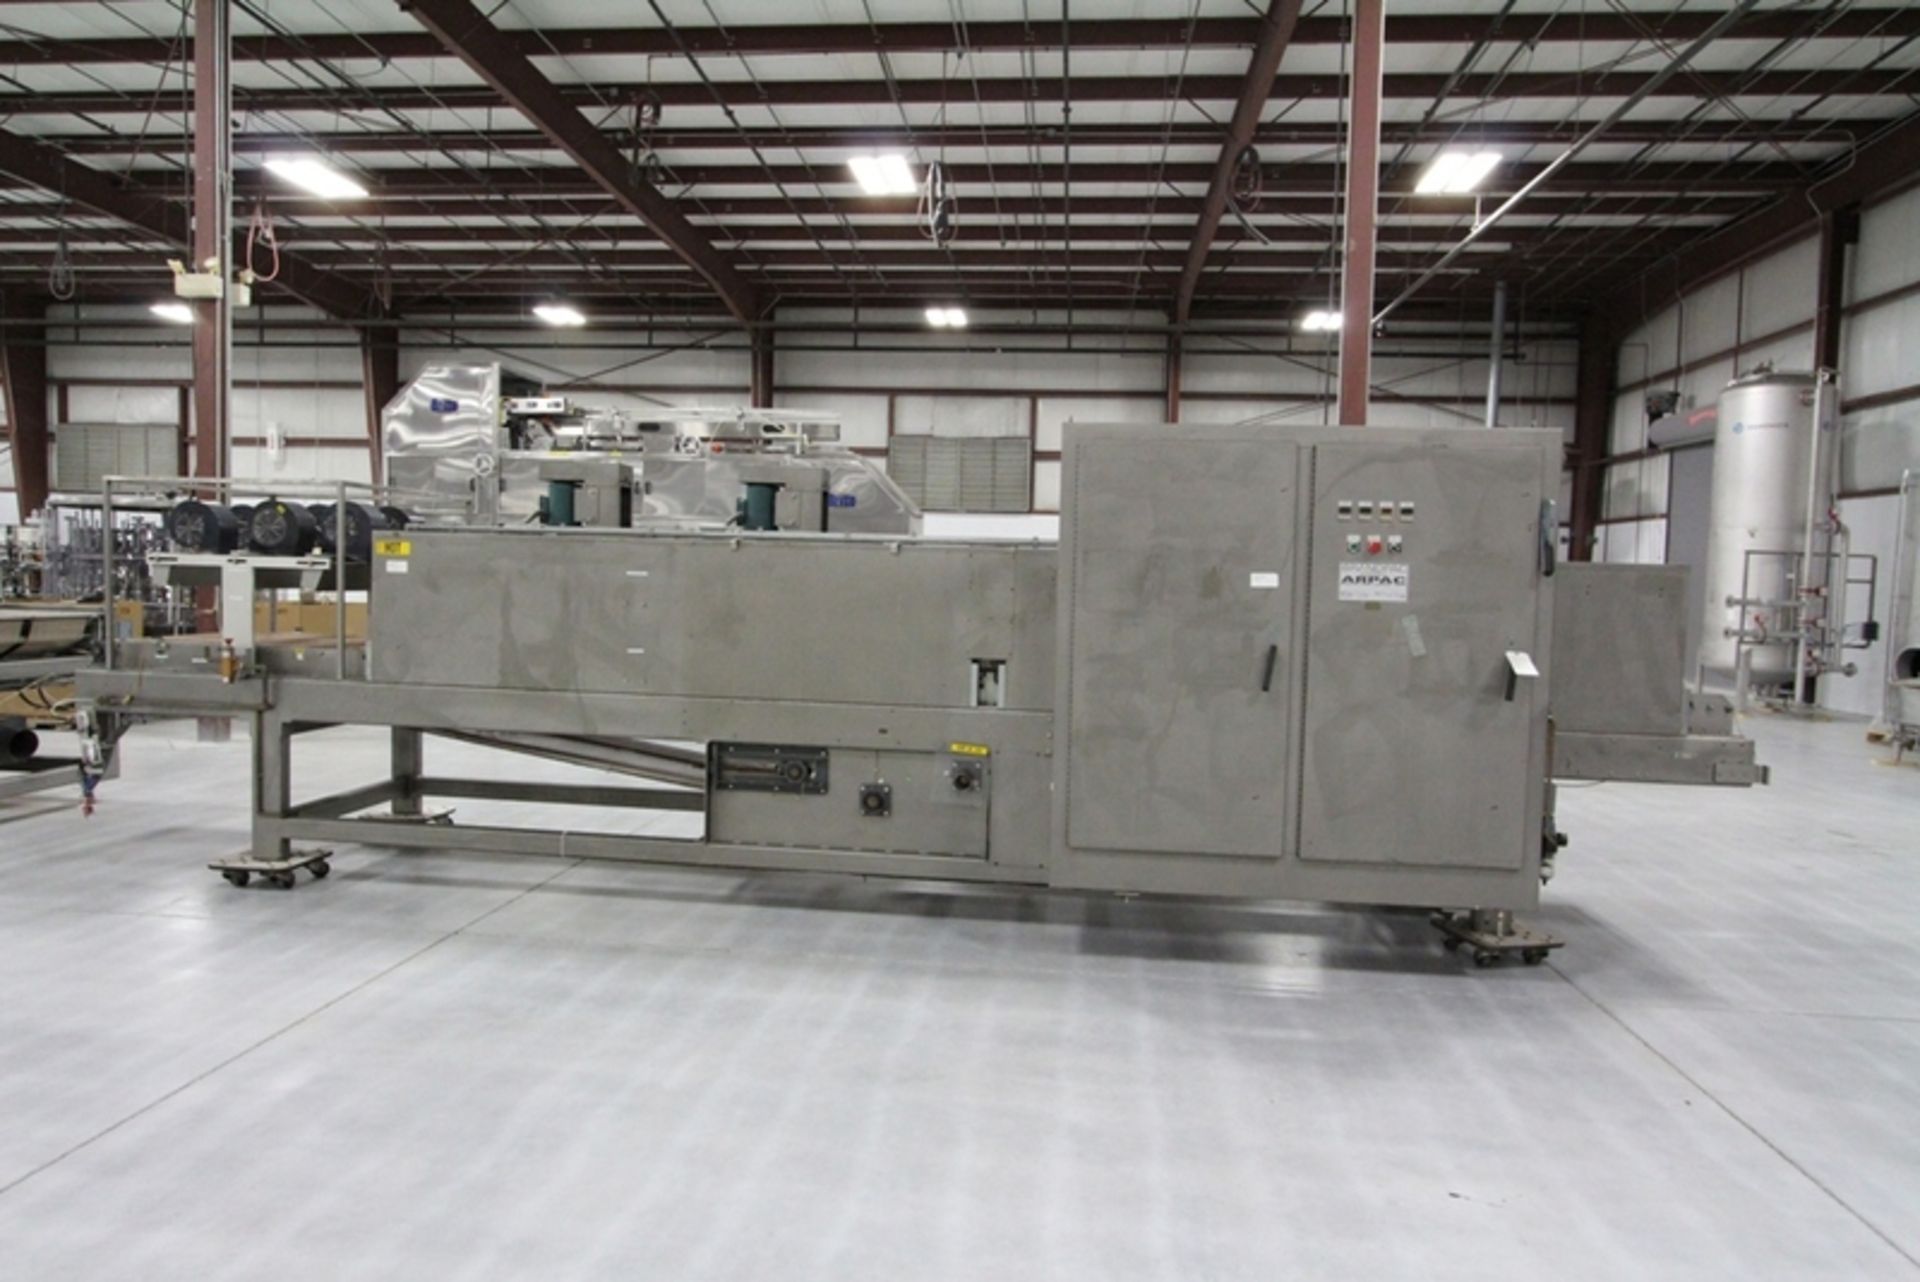 Arpac Shrink Wrapper Bundler with Heat Tunnel Automatic Wraps Bottles/Cans with Clear or Print